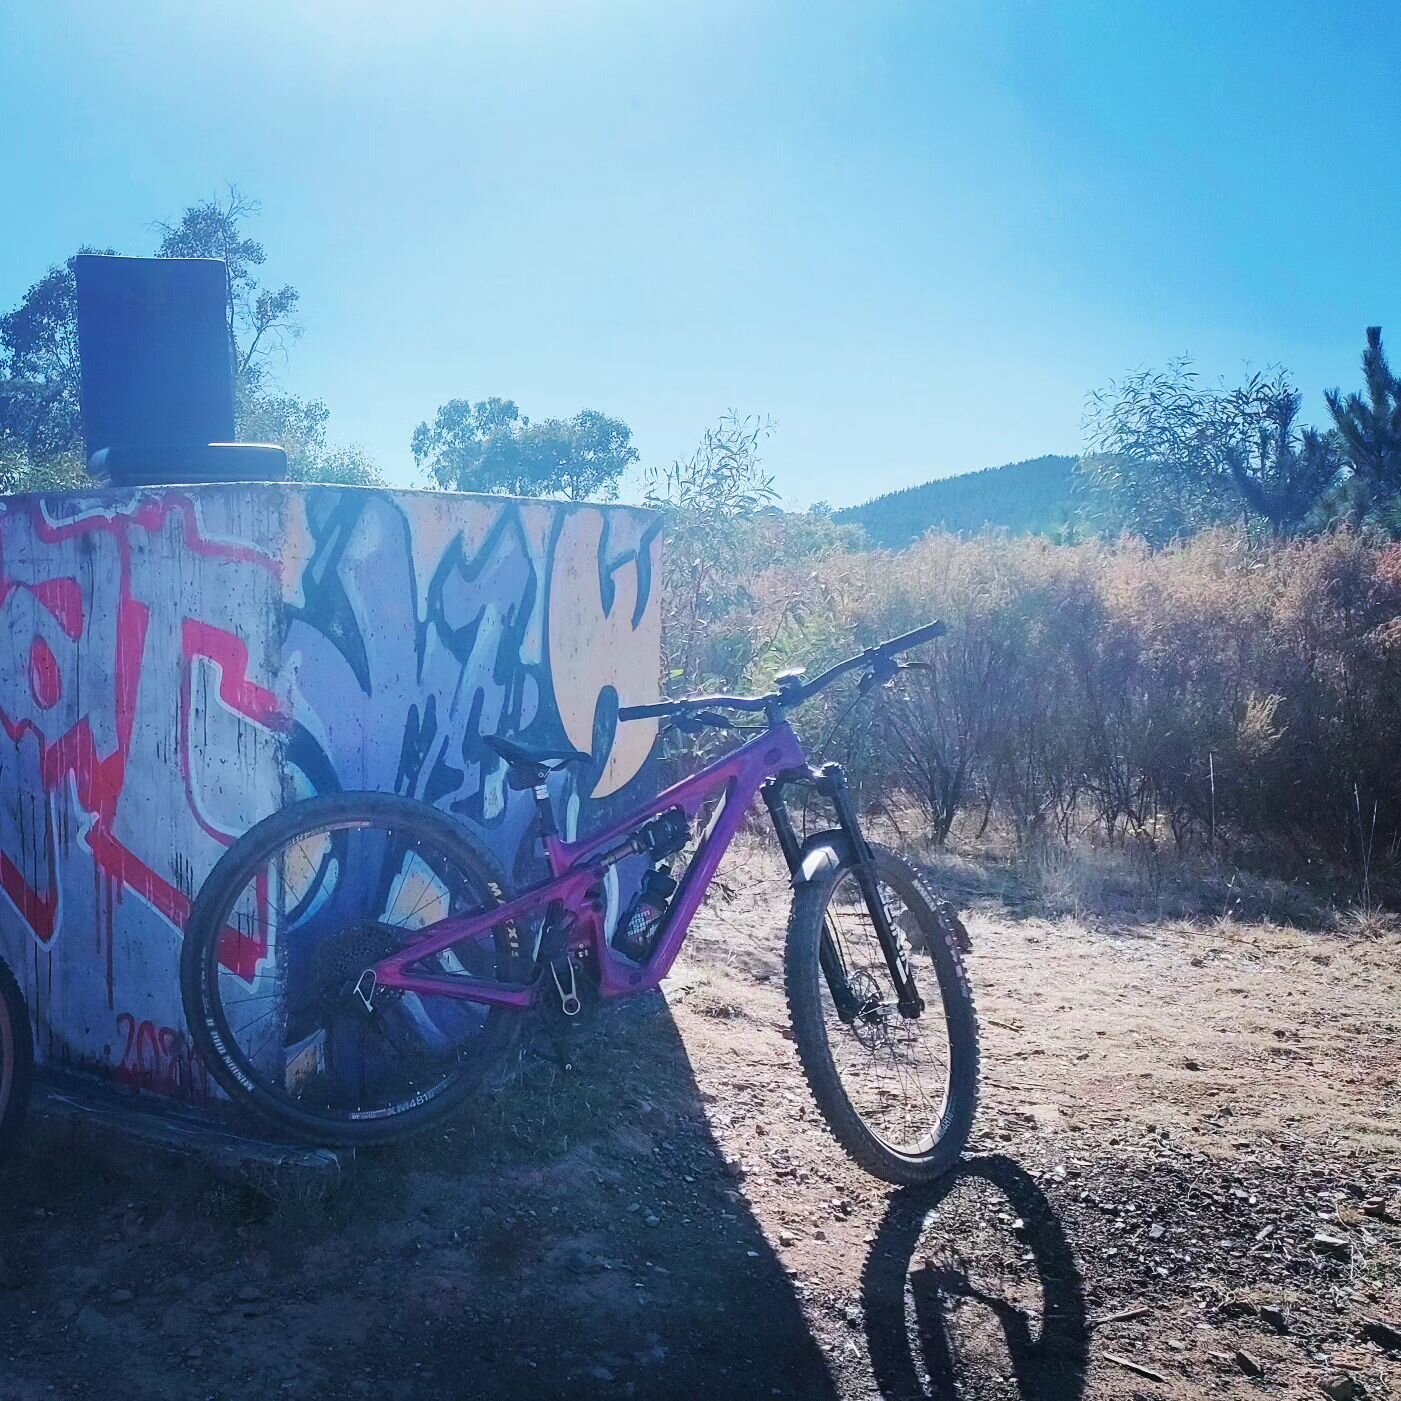 Natalya's custom built Yeti SB140 has been getting ridden in nicely. It's had about 12 rides now and about 5 washes 🚿.

It is awesomely super stable on the descents yet climbs switch backs and rocky ascents with confidence. 

The SRAM X0 T-type AXS 